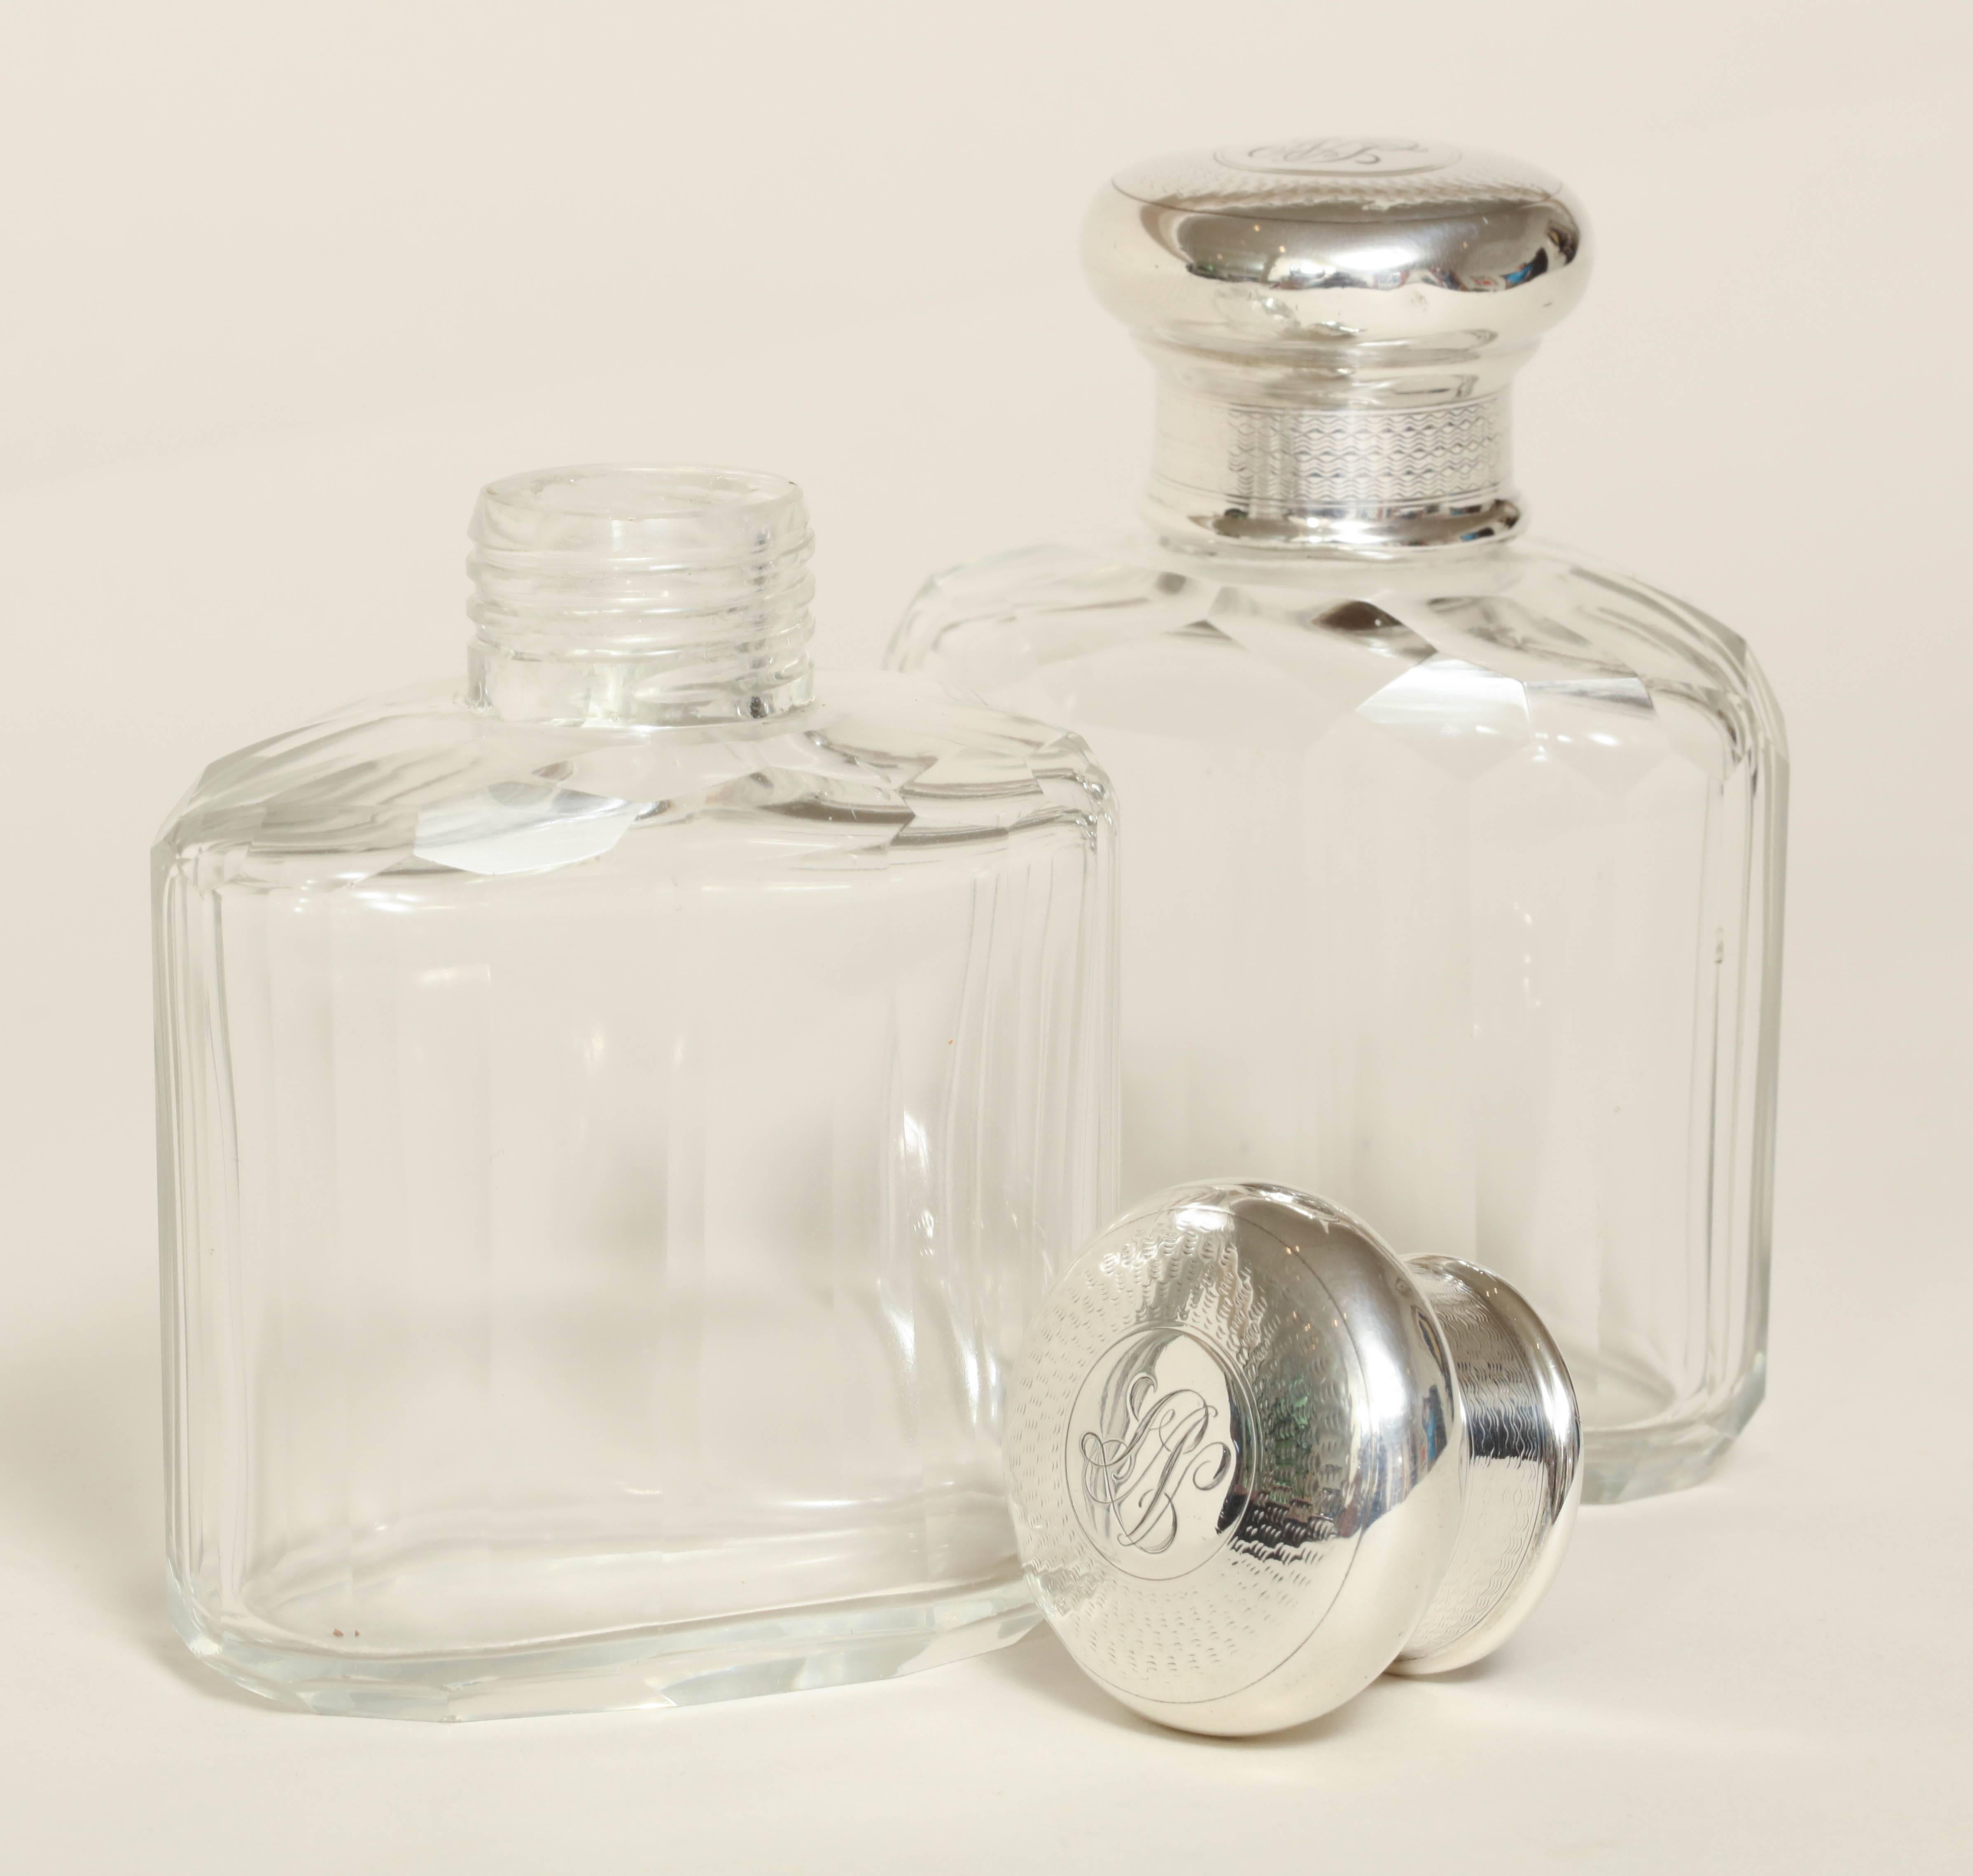 Sybil Dunlop English Art Deco Pair of Crystal & Sterling Silver Scent Bottles For Sale 2